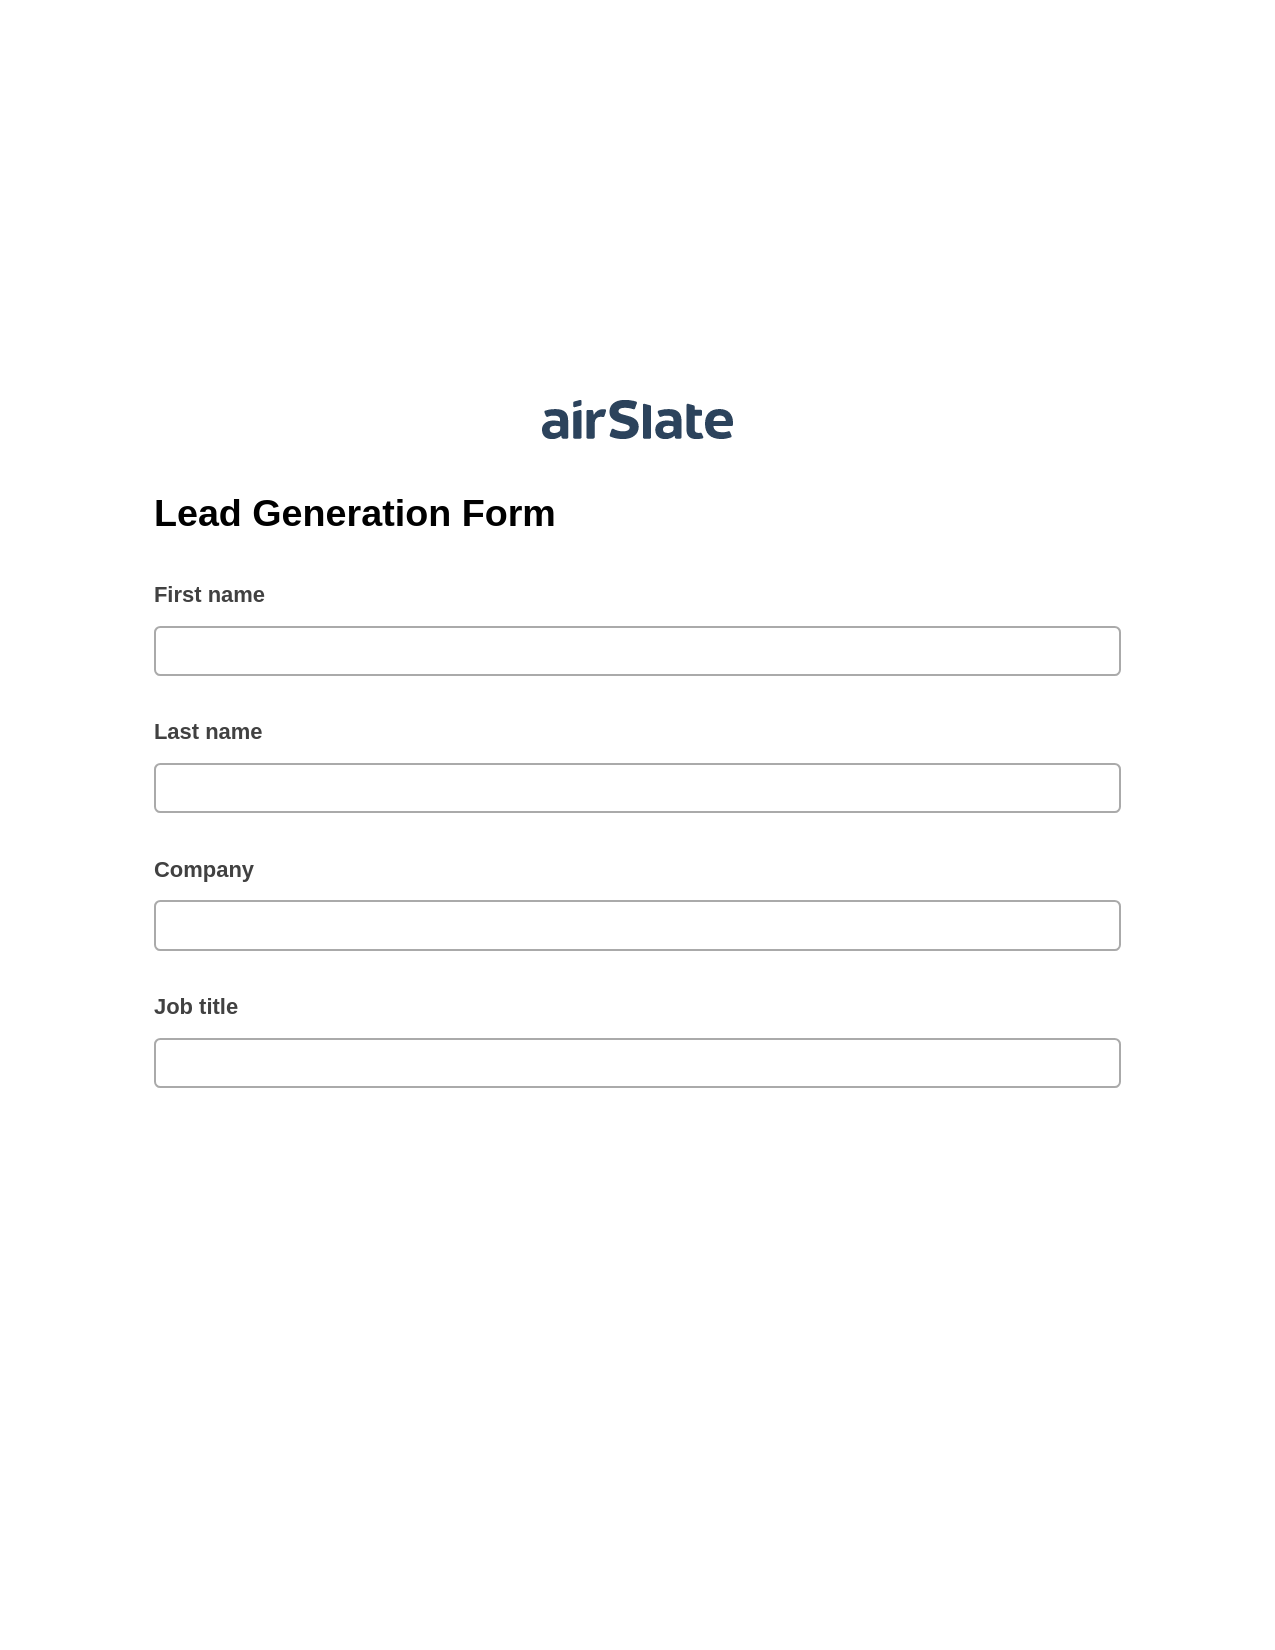 Multirole Lead Generation Form Pre-fill from Salesforce Records Bot, Remove Tags From Slate Bot, Export to Salesforce Record Bot